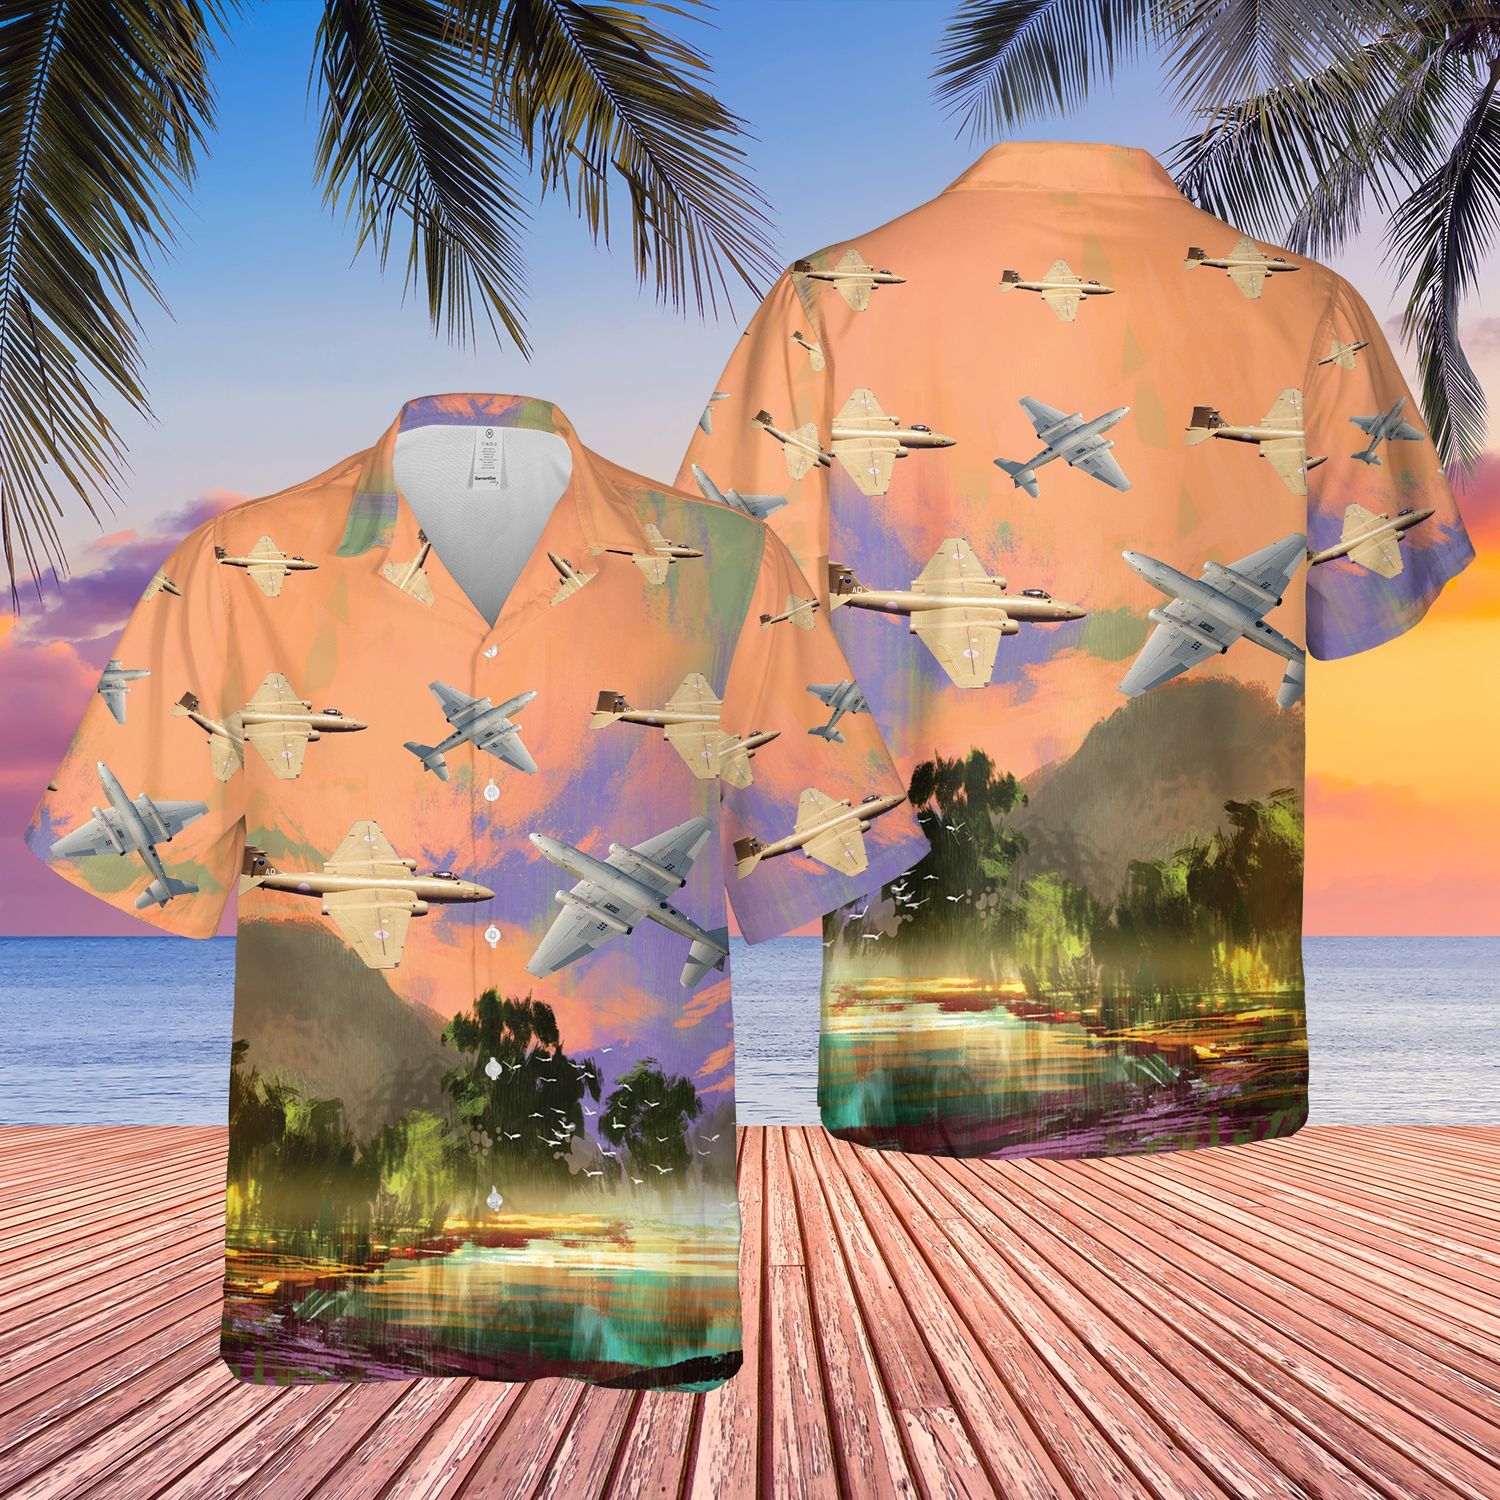 Find yourself a great beachwear here 371